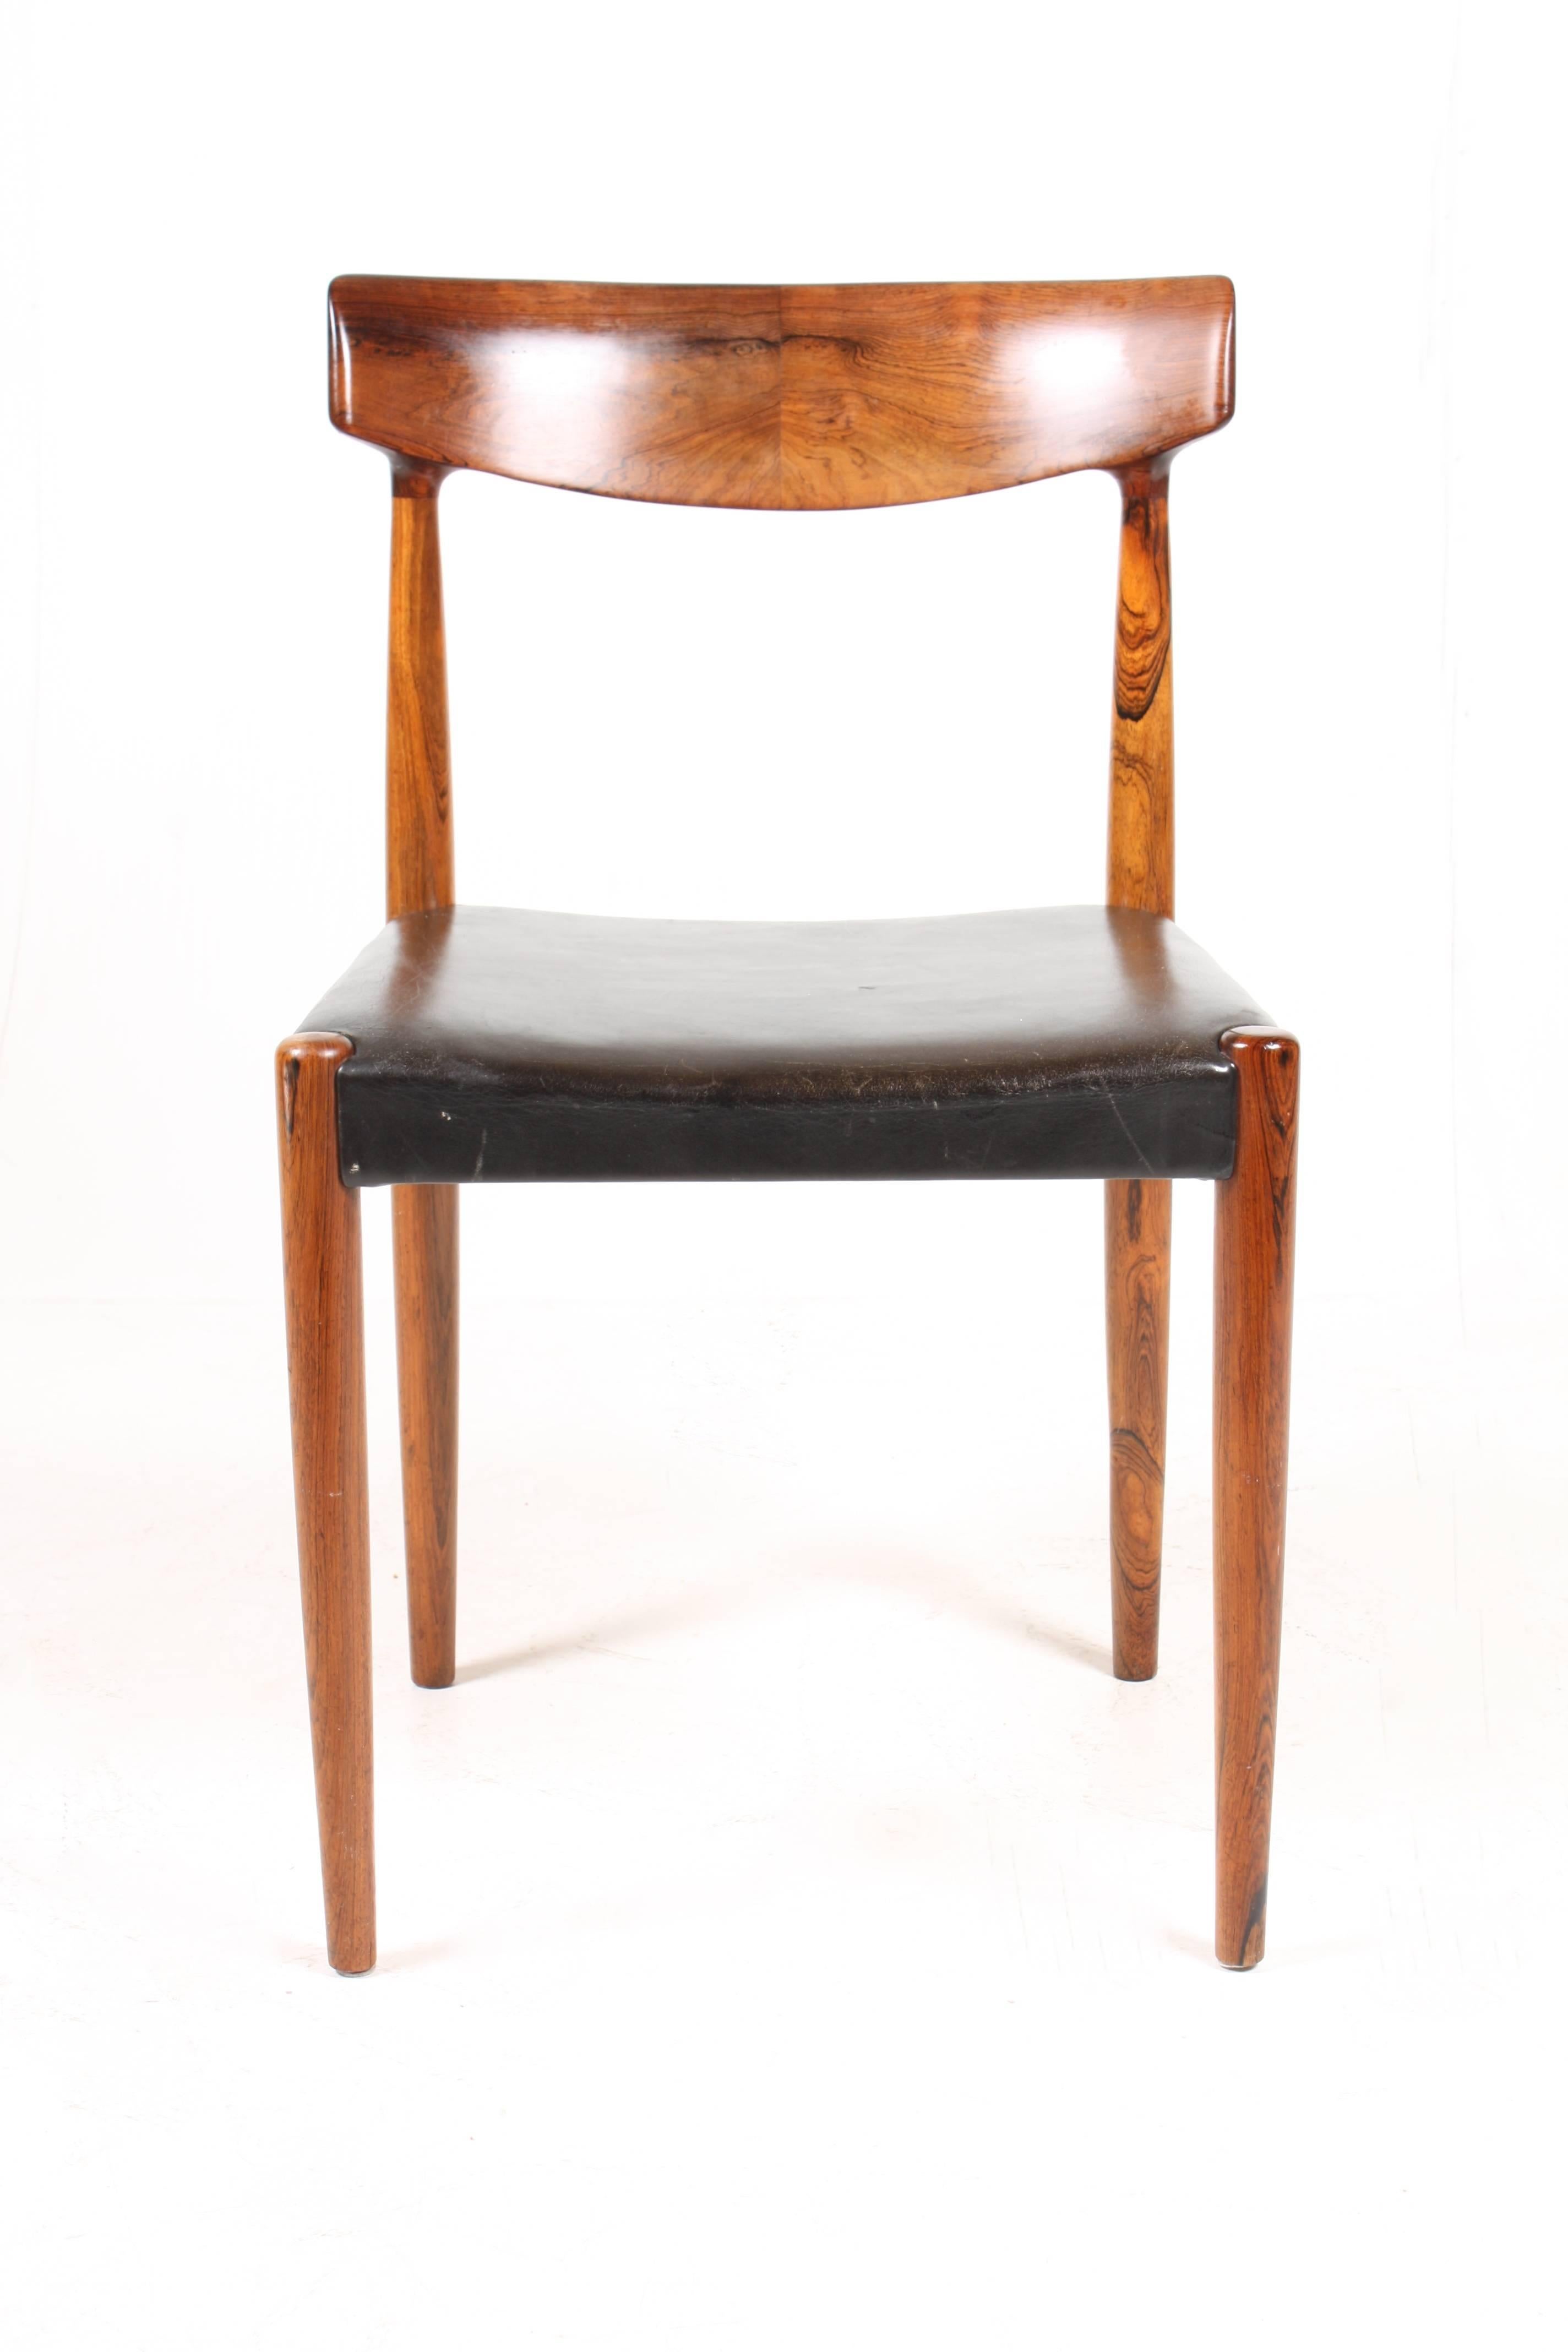 Set of six dining chairs in solid rosewood with seats in patinated black leather. Designed by Knud Færch. Model no. 343. Made by Slagelse Møbelværk A/S of Denmark. Great original condition.